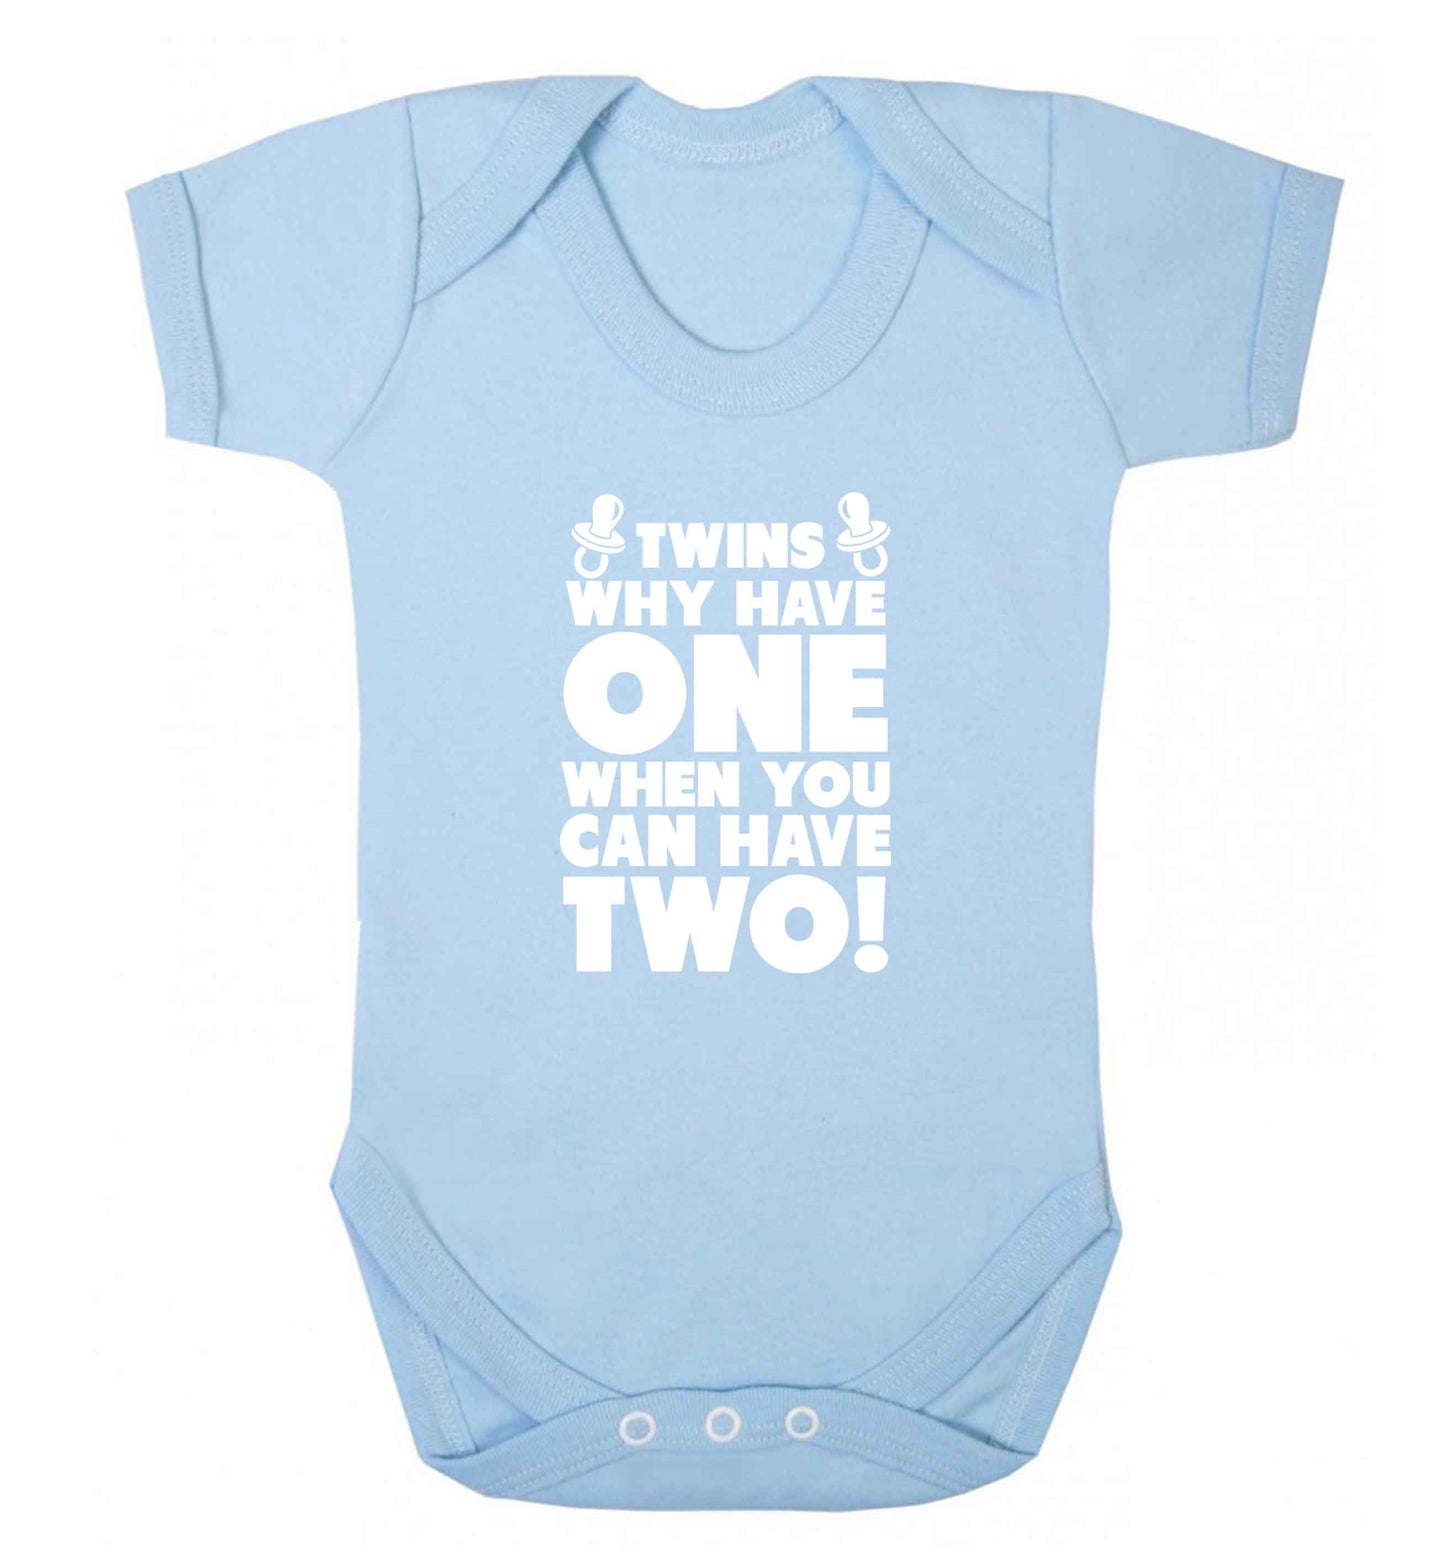 Twins why have one when you can have two baby vest pale blue 18-24 months